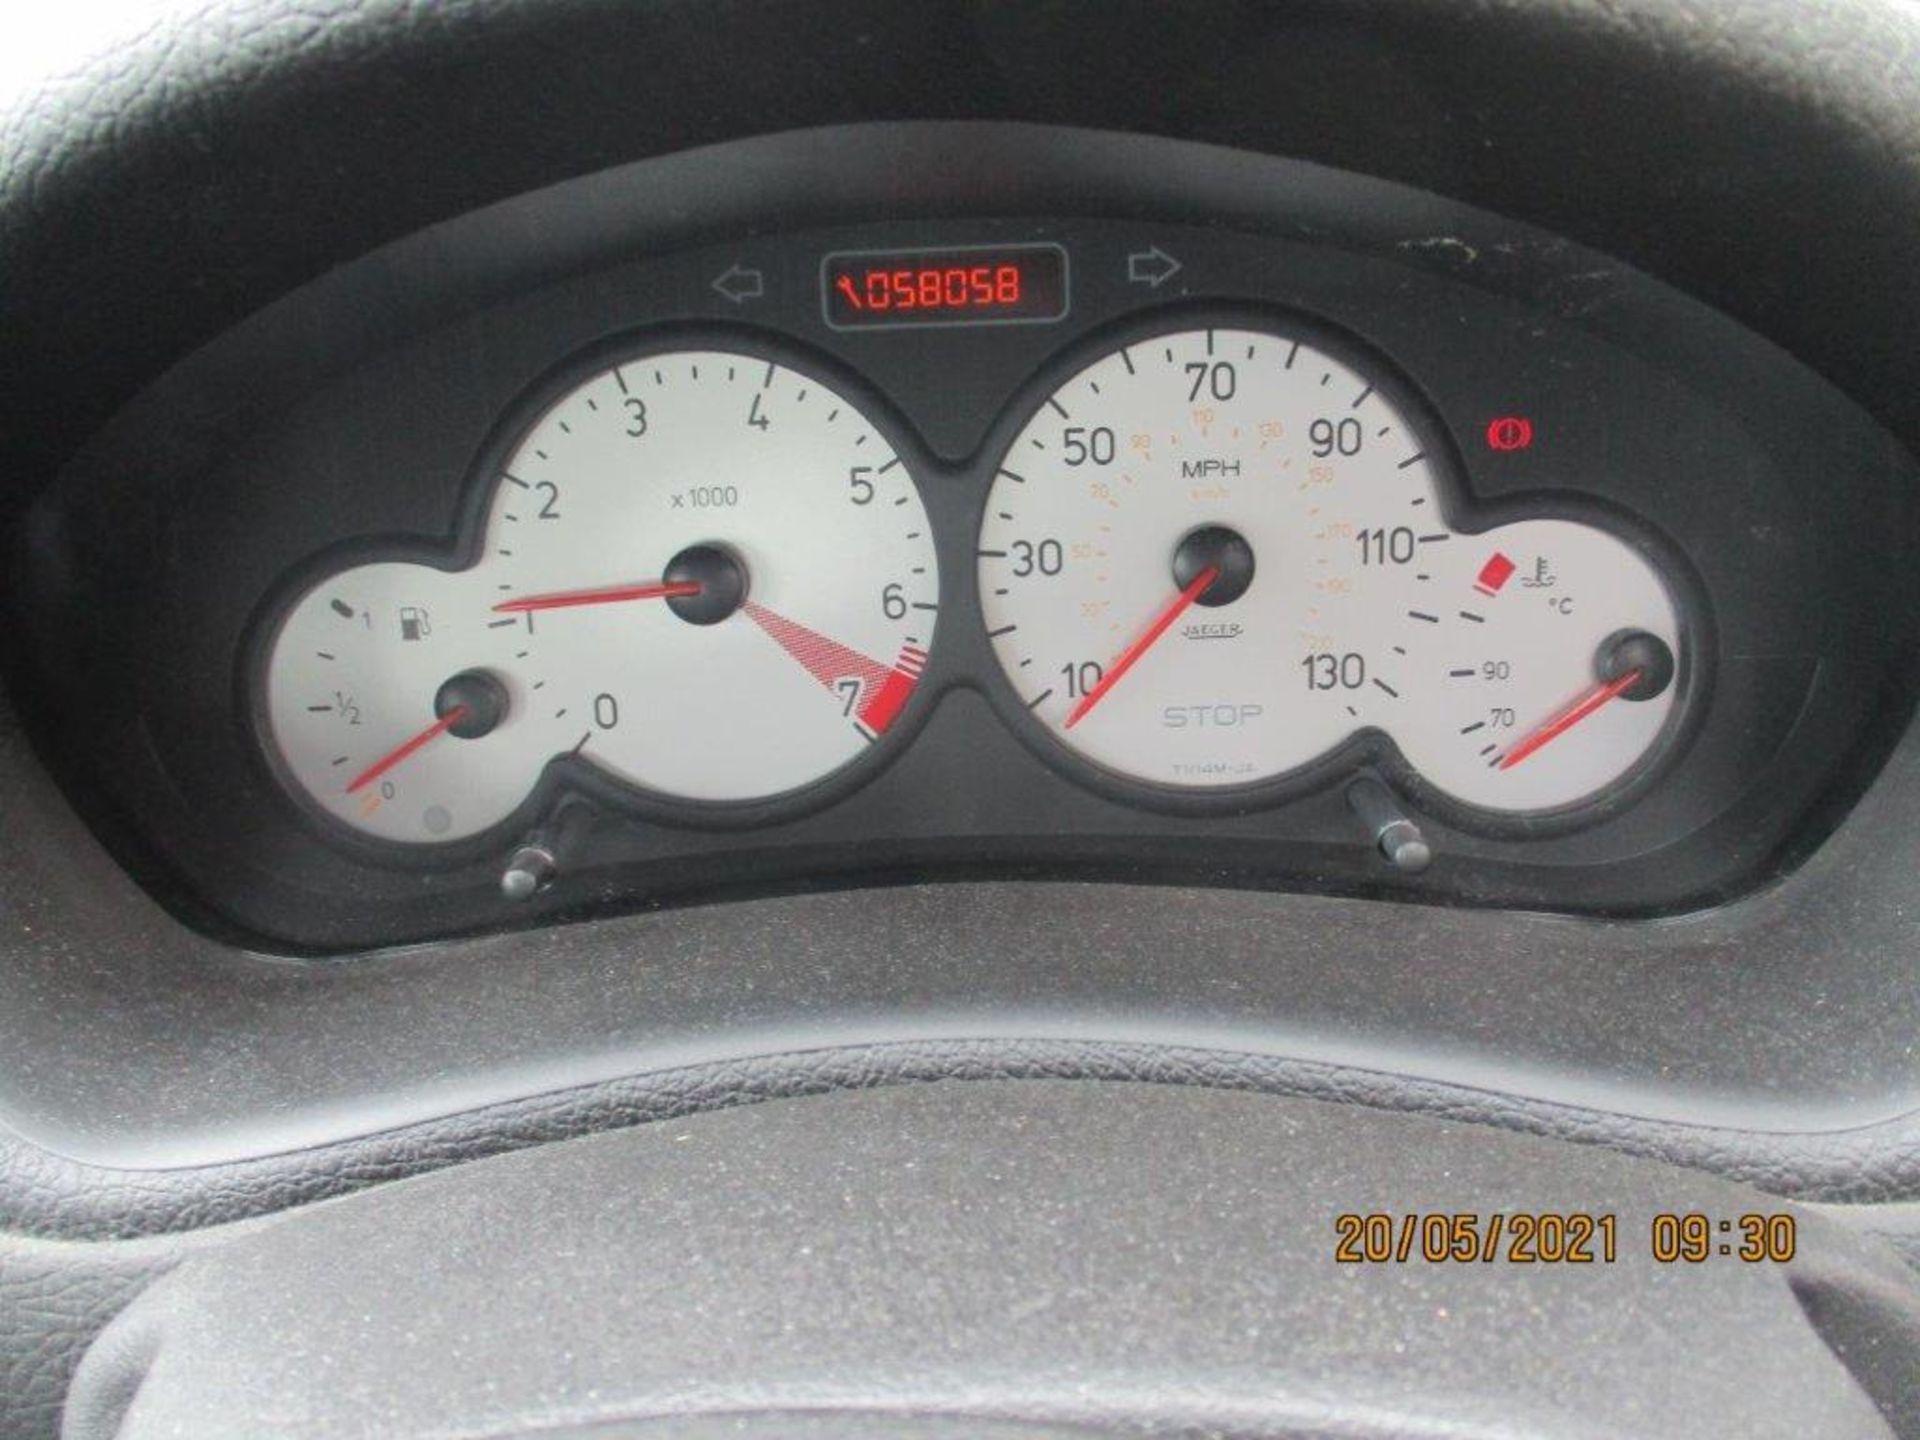 04 04 Peugeot 206 S - Image 19 of 20